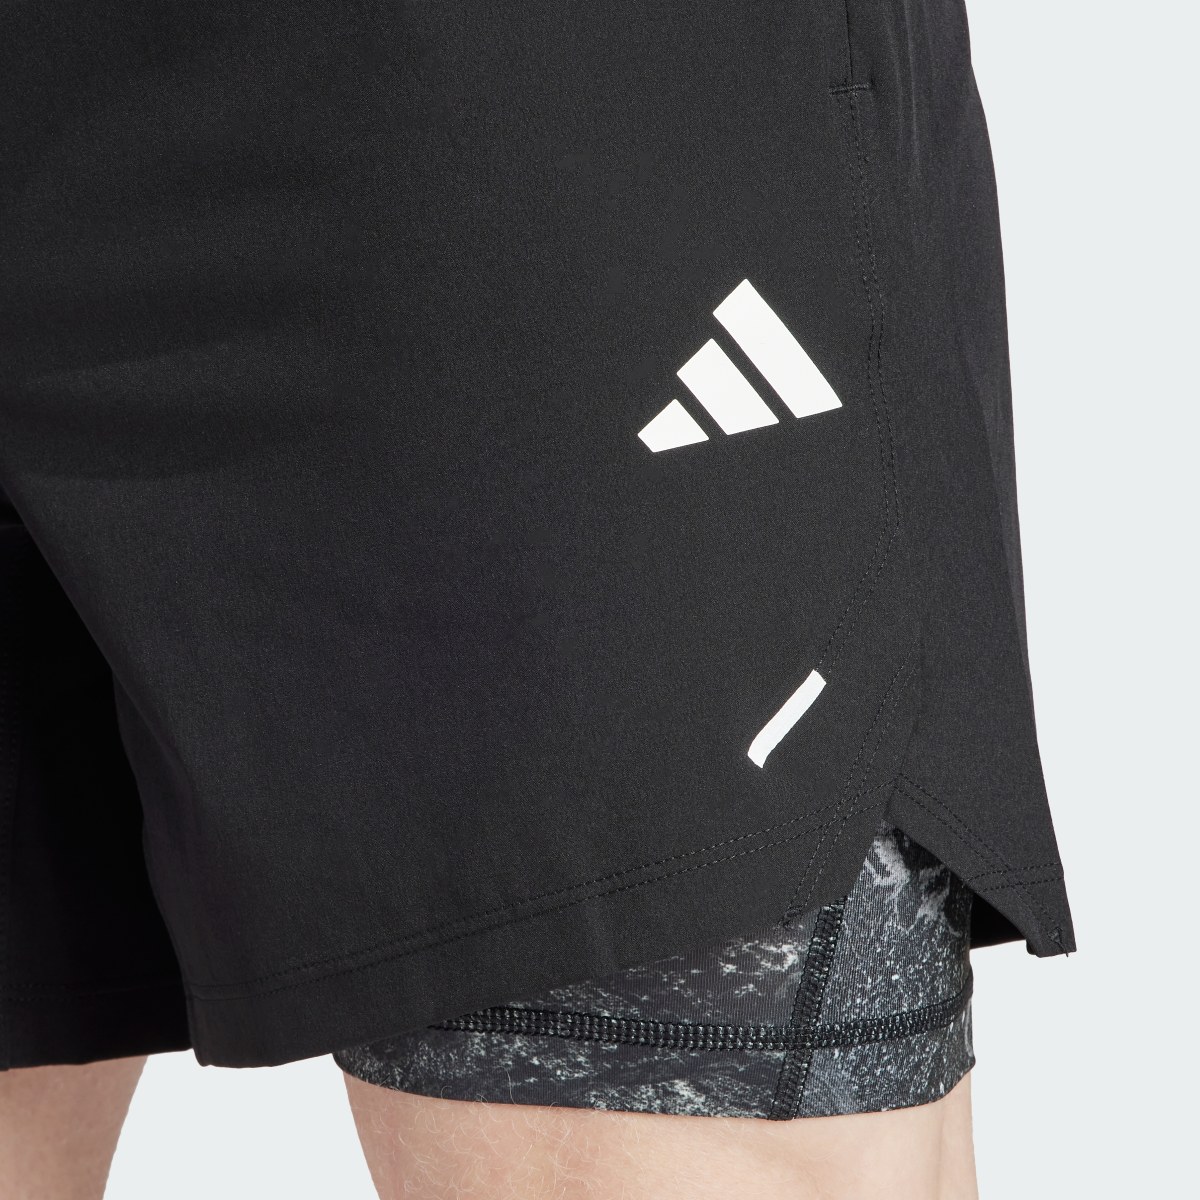 Adidas Power Workout 2-in-1 Shorts. 5